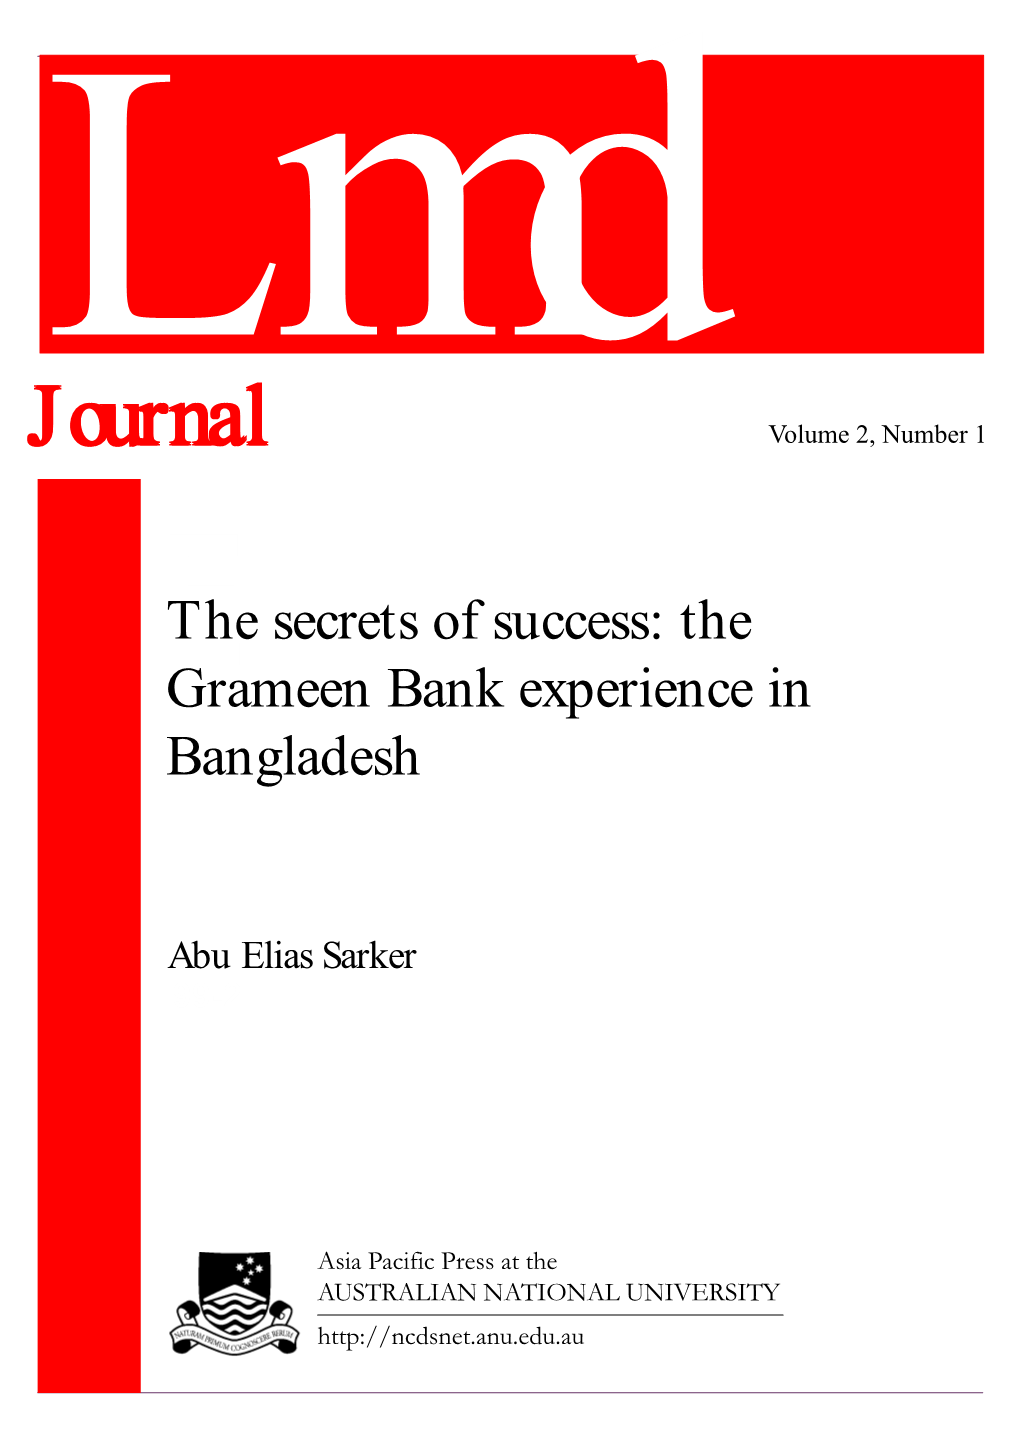 The Secrets of Success: the Egrameen Bank Experience in Bangladesh